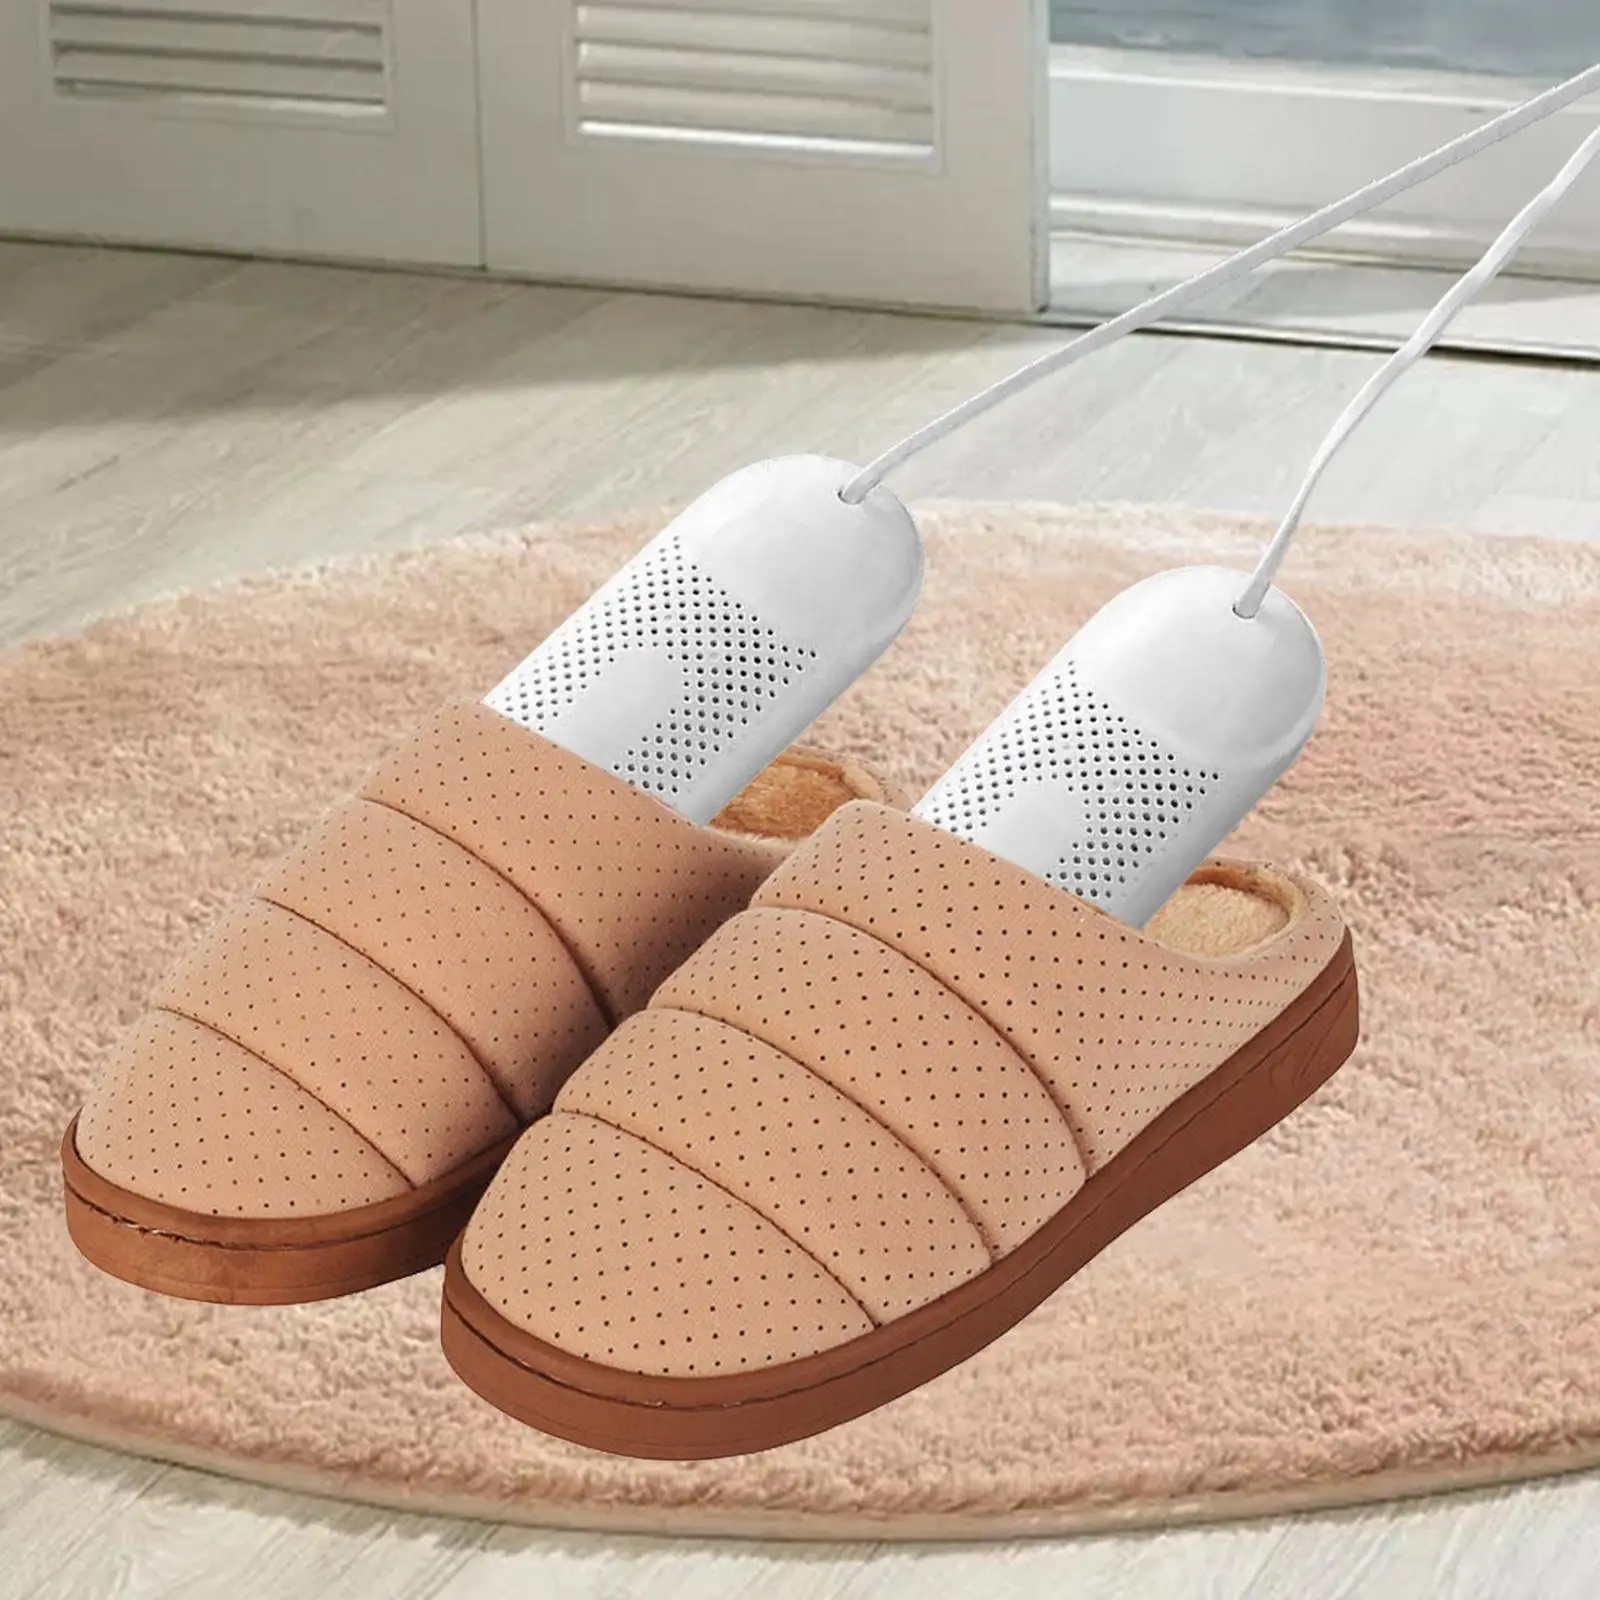 Portable Shoes Dryer Heater 360 Degree Drying Constant Temperature Shoes Warmer for Home Office Socks Adults Kids Slippers